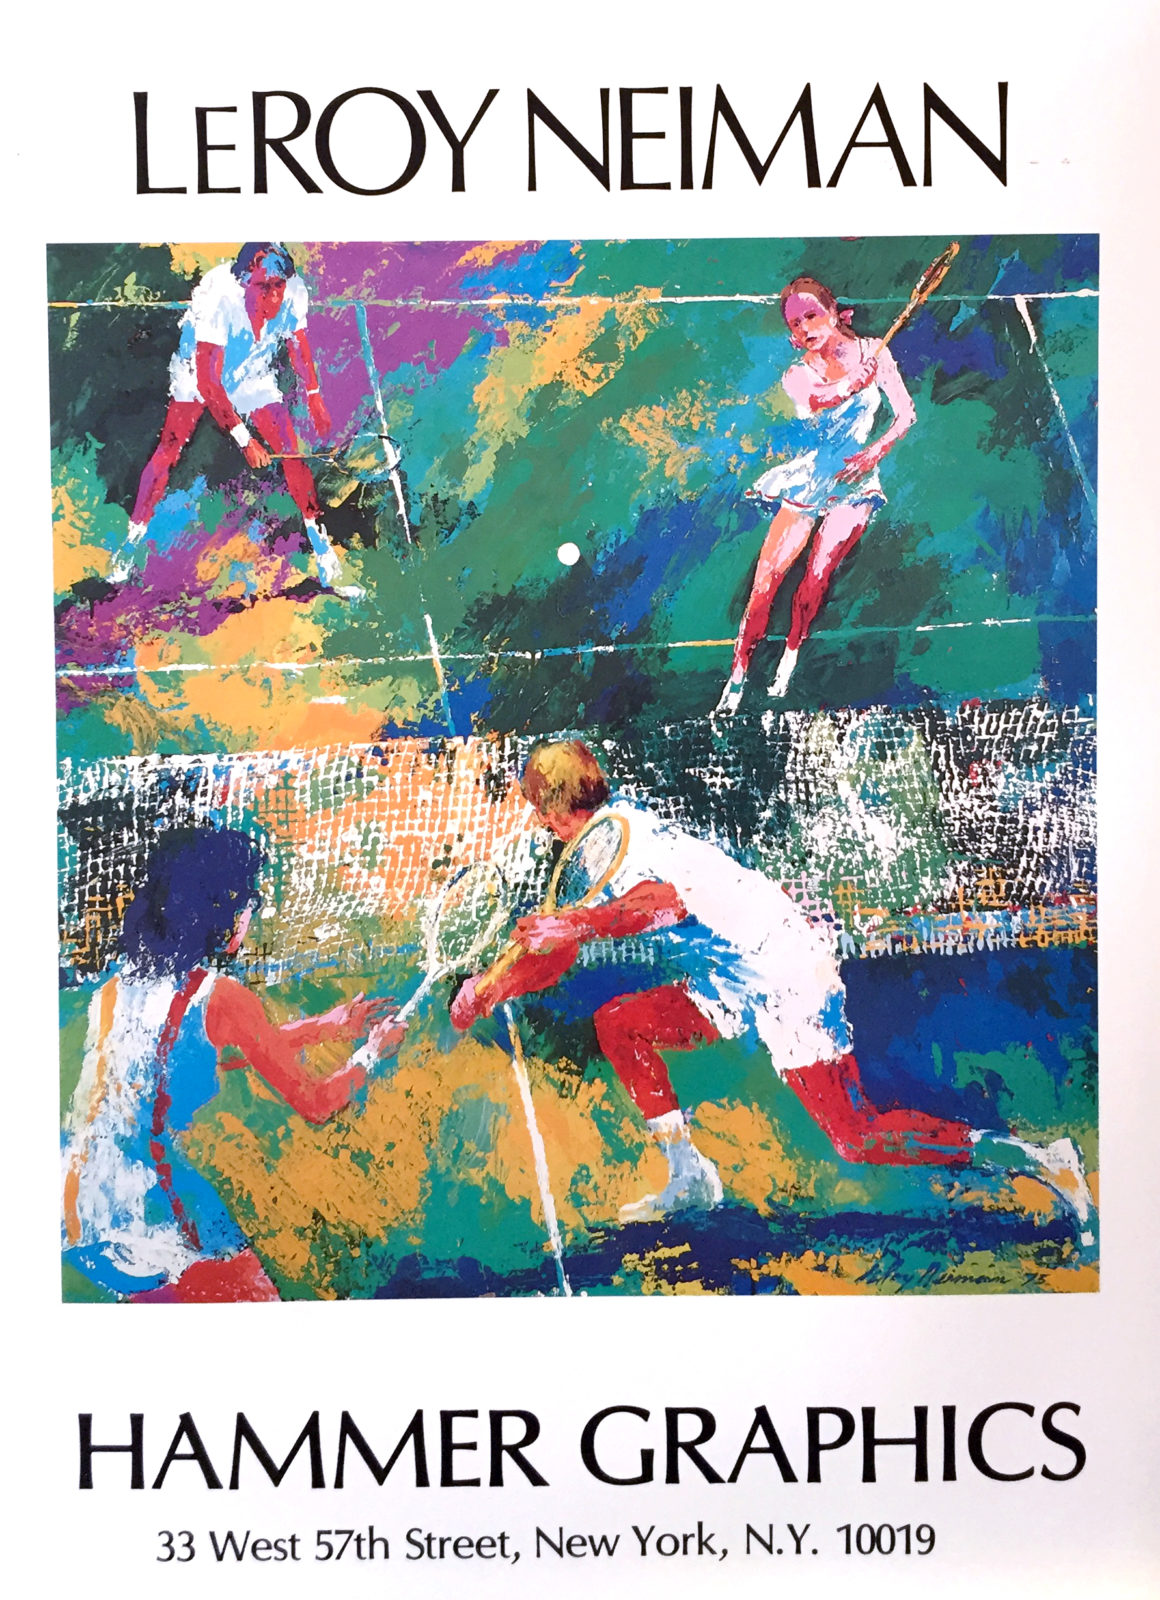 Mixed Doubles Tennis poster